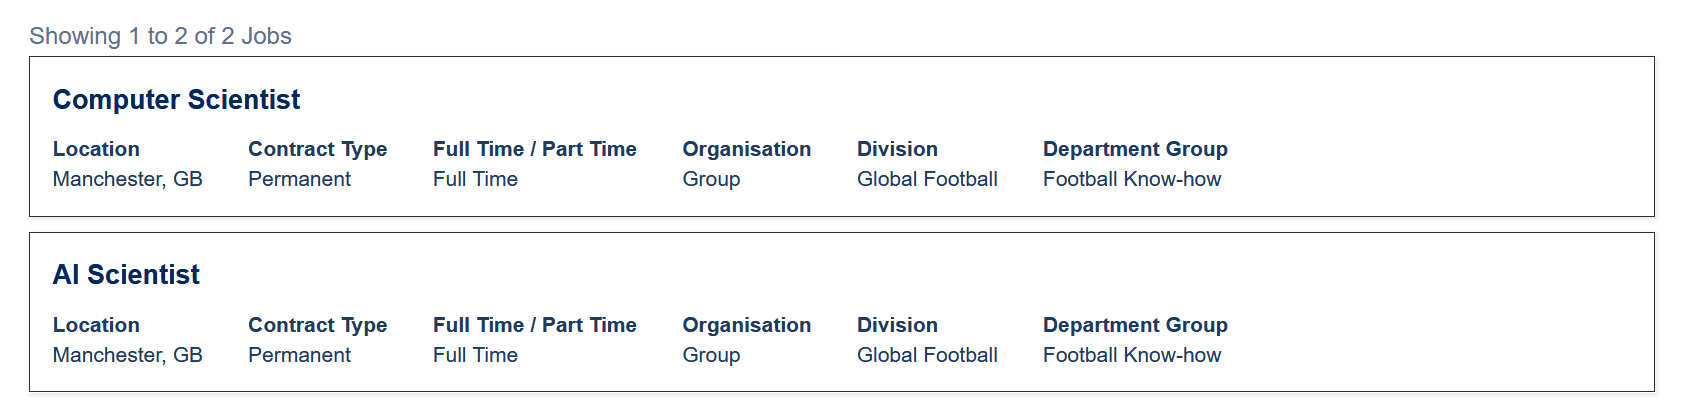 Screenshot of the CFG job listings, with the Department Group given as 